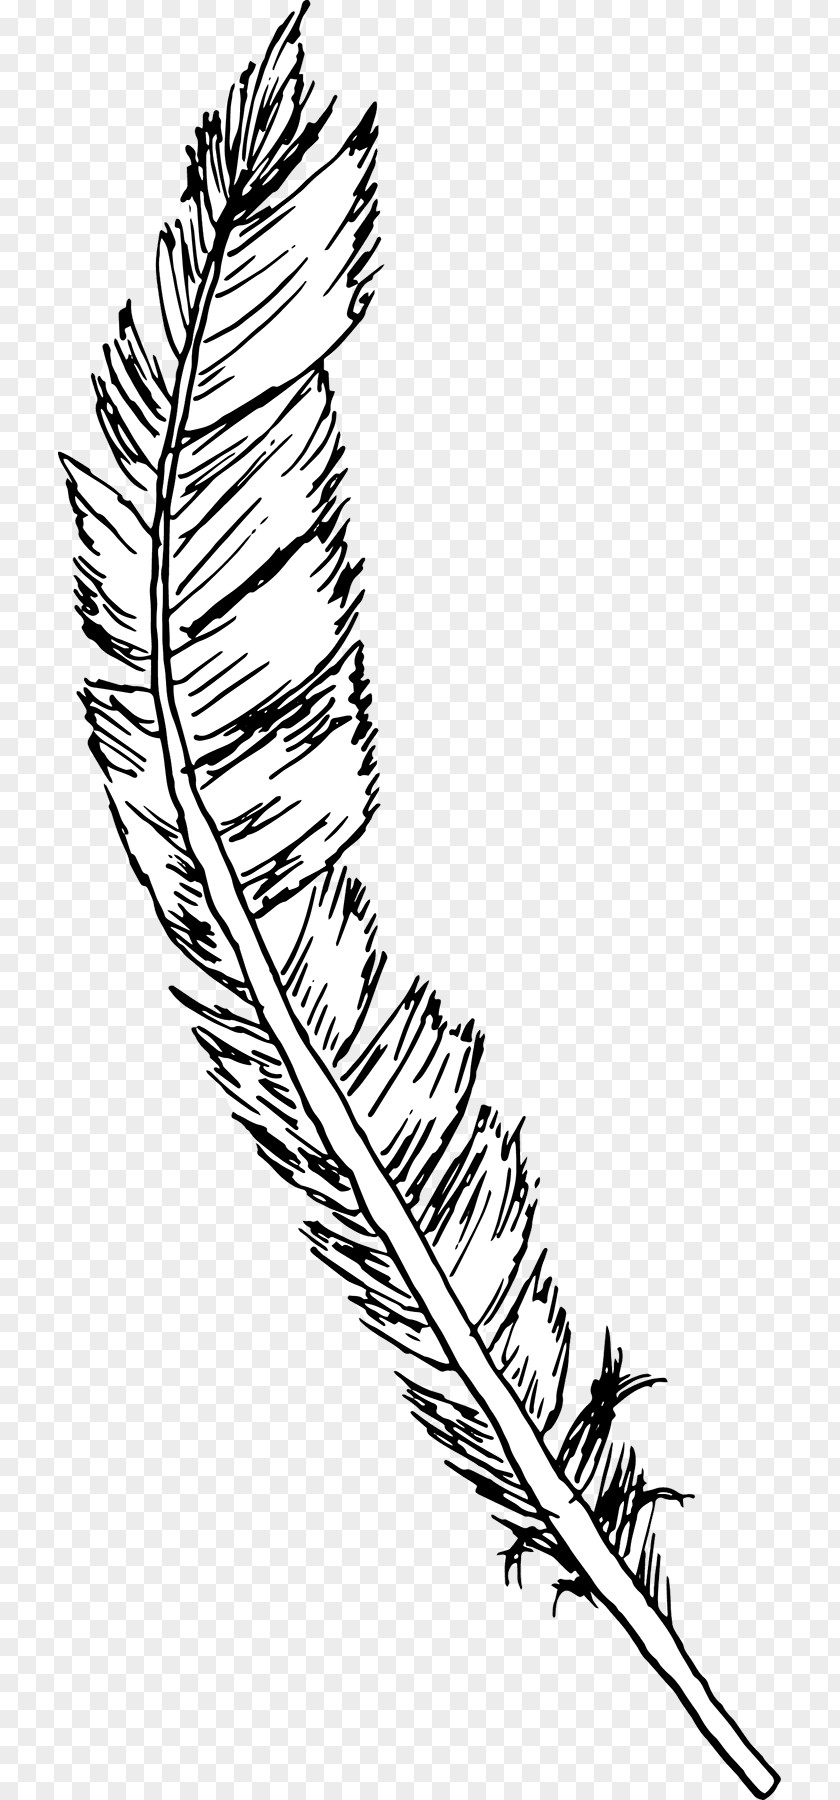 Falling Feathers Drawing Line Art Feather PNG